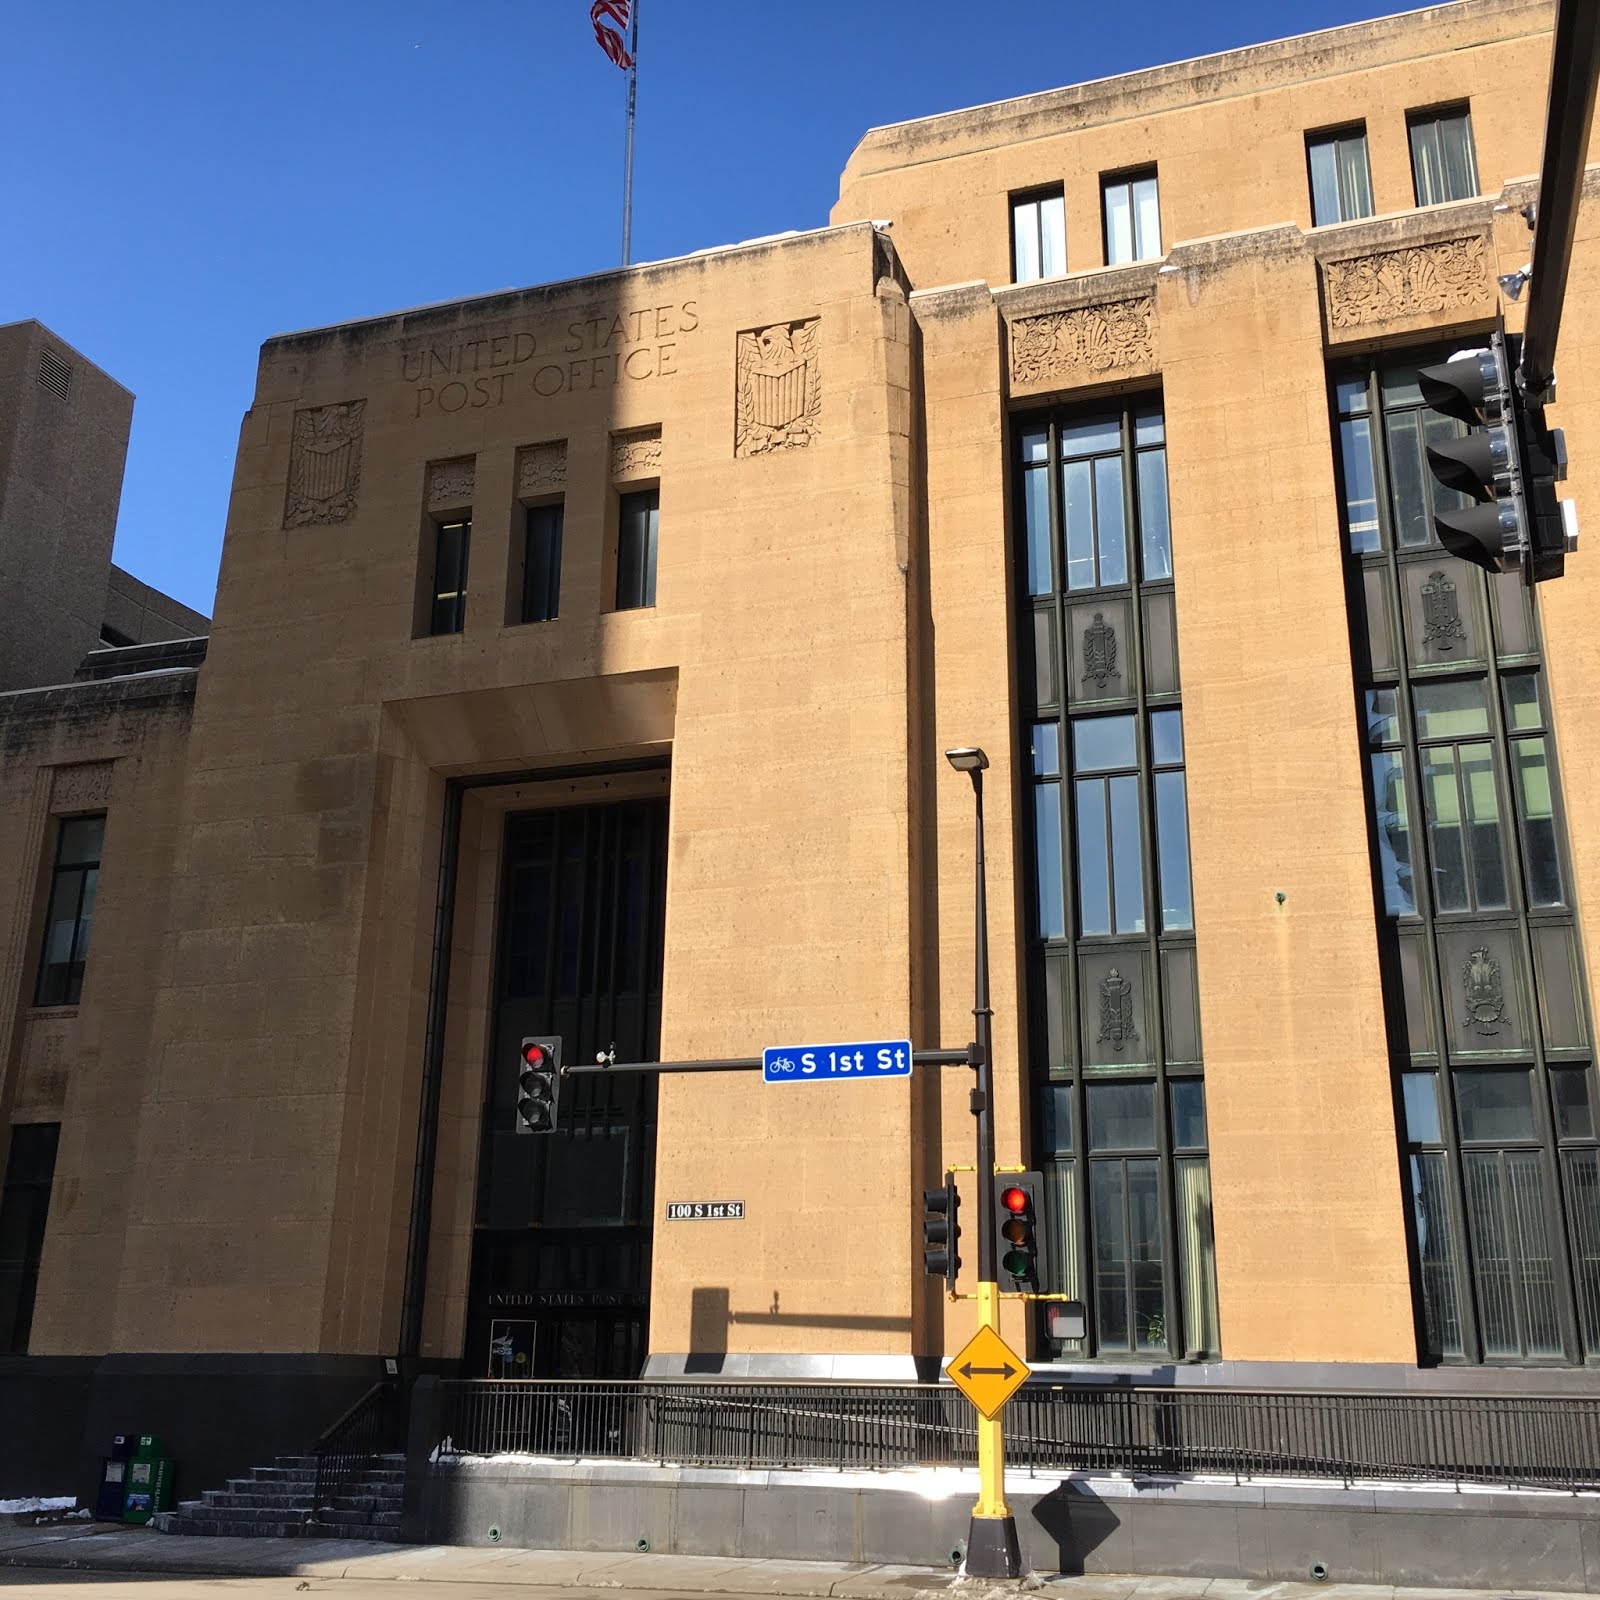 The main western public entrance to the Minneapolis Post Office